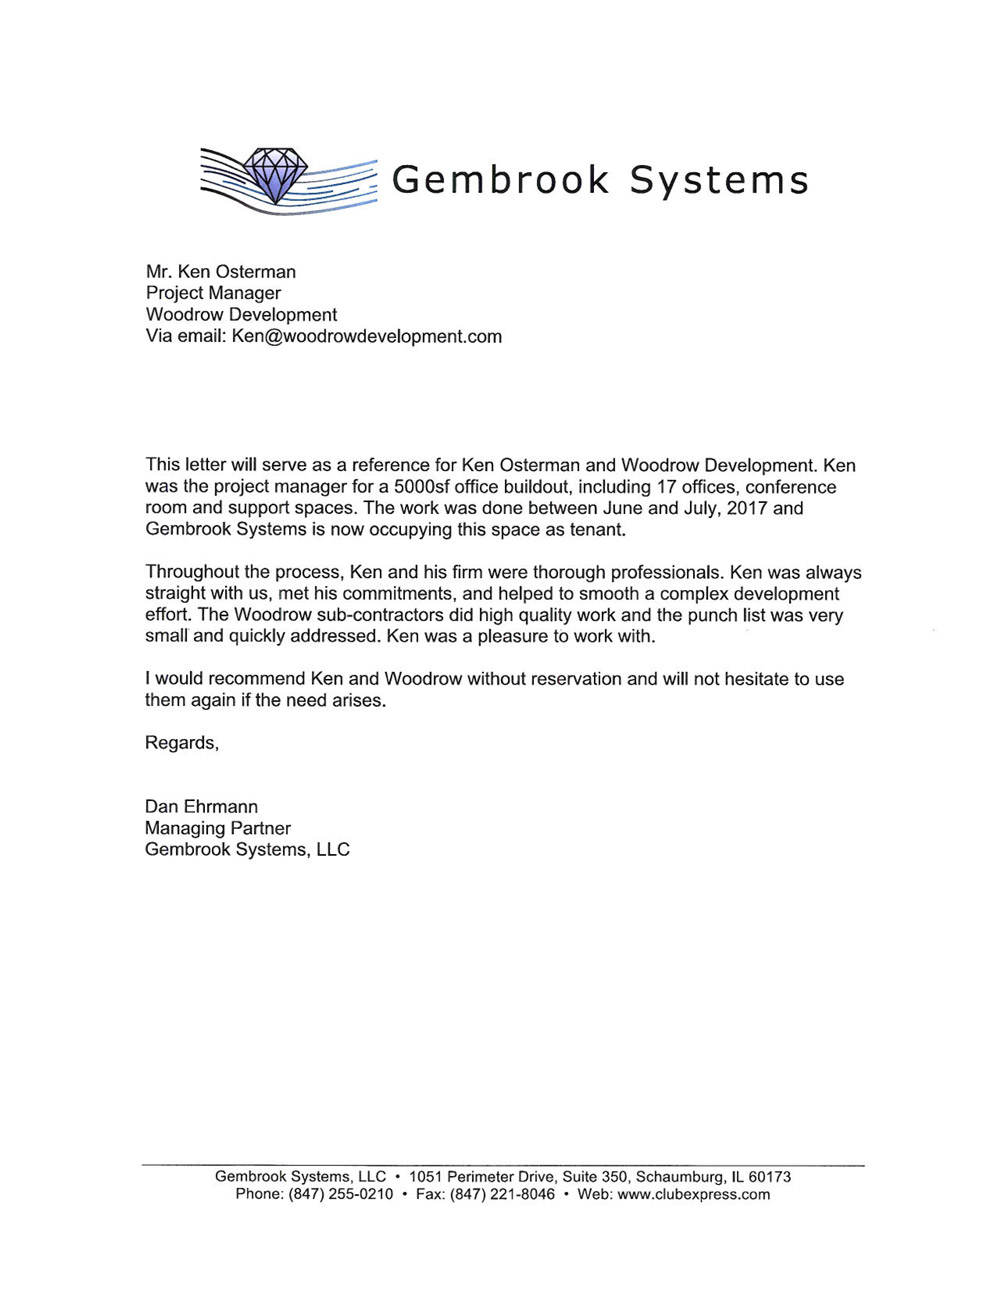 Gembrook Systems